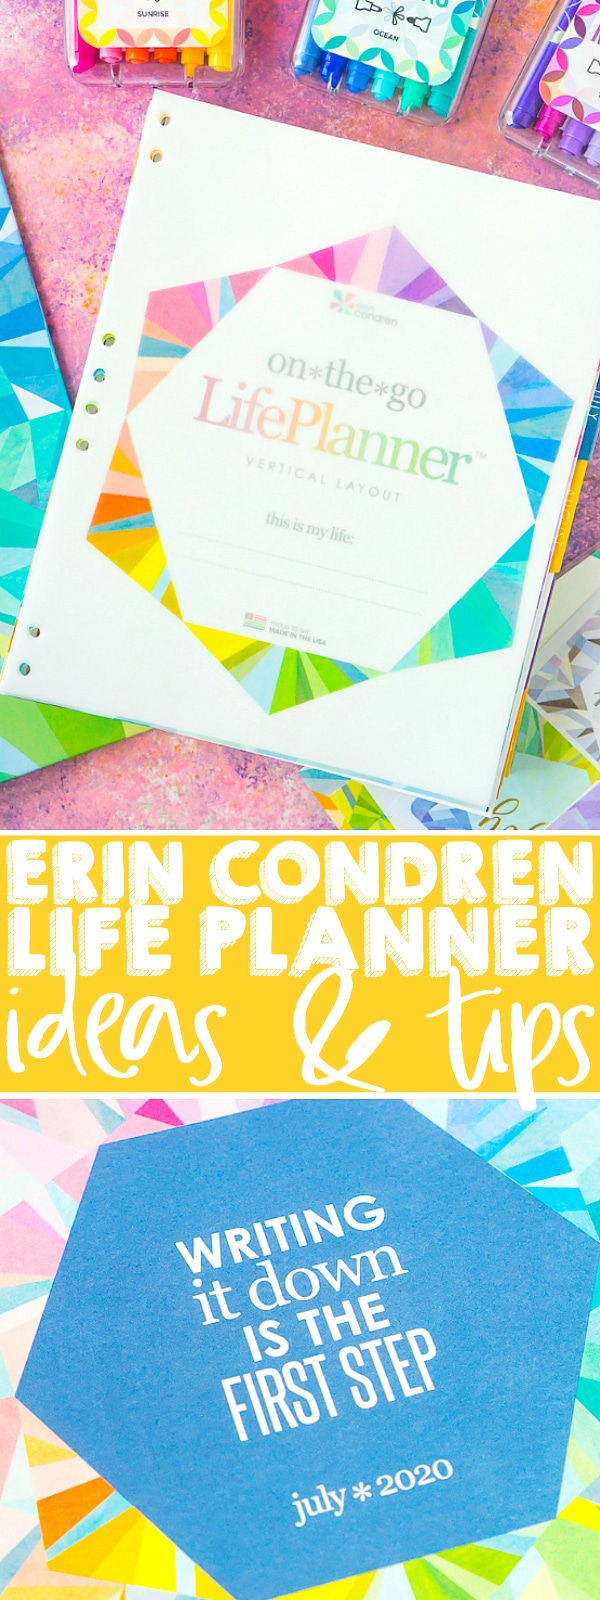 Looking for Erin Condren Planner Ideas? I'm sharing how I use my Erin Condren Life Planner from the monthly and daily spreads to the note pages in the back. Everything you need for your EC planner with organizational tips for life and work! | THE LOVE NERDS #ecplanner #plannertips #planneraccessories